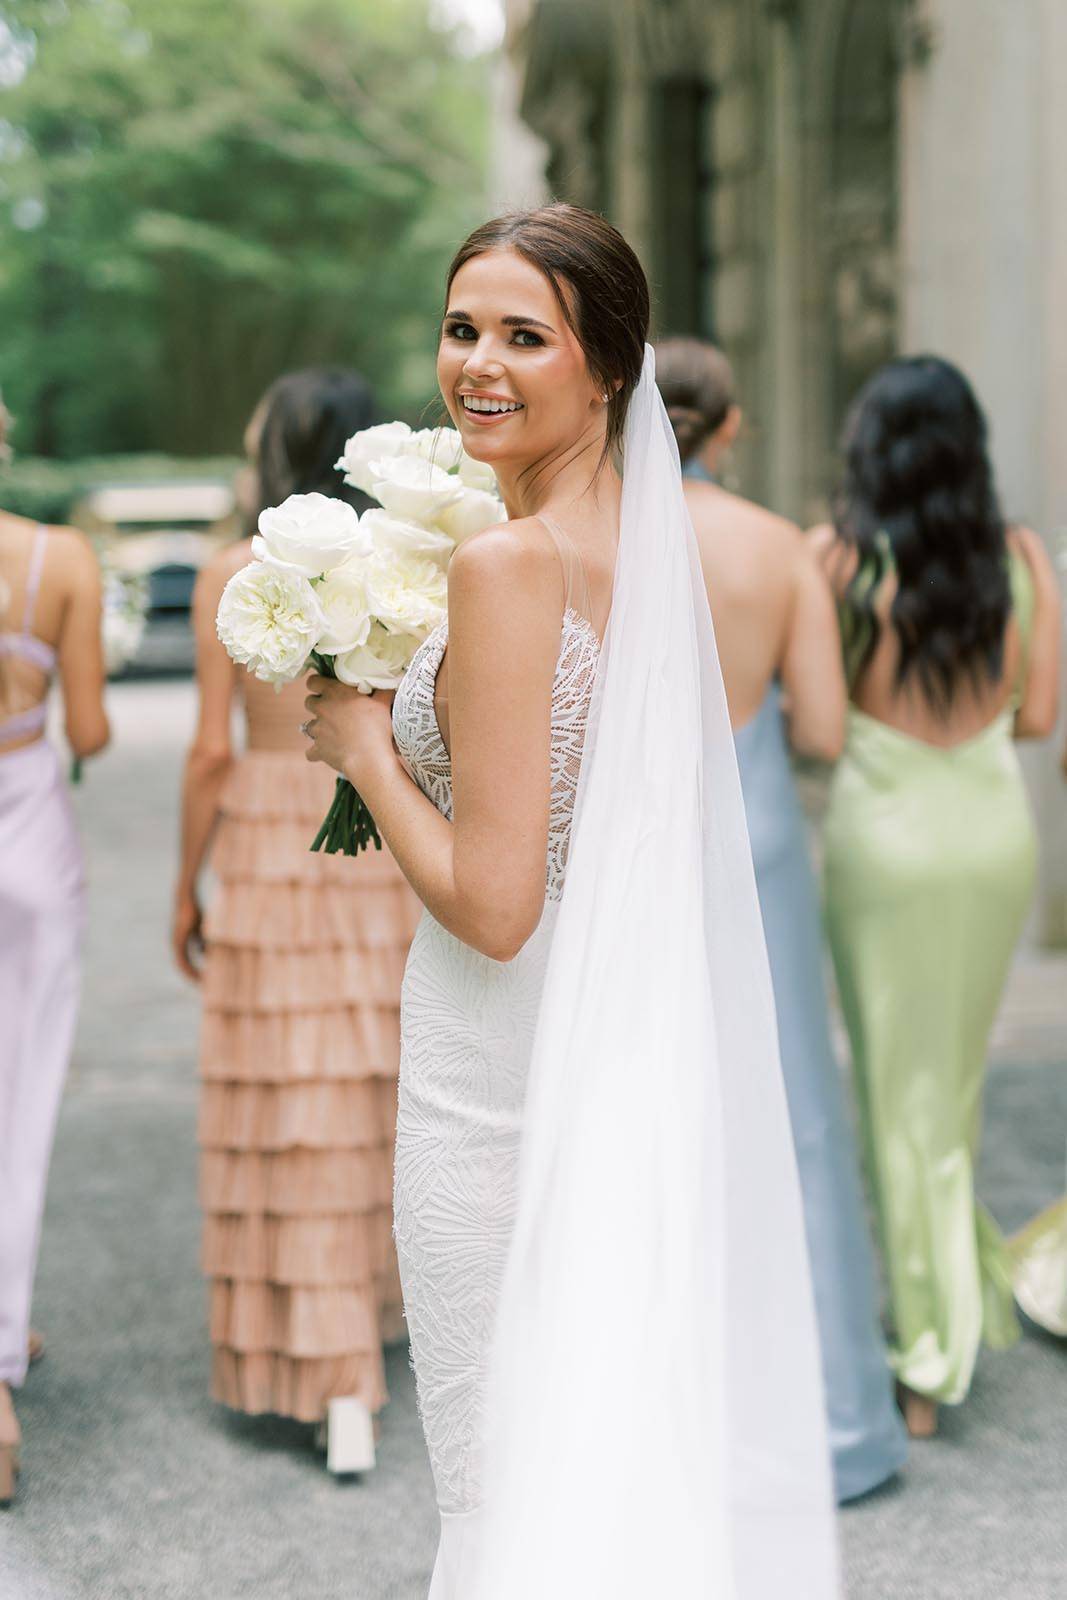 Bride looks back at the camera, showcasing a stunning smile and bouquet